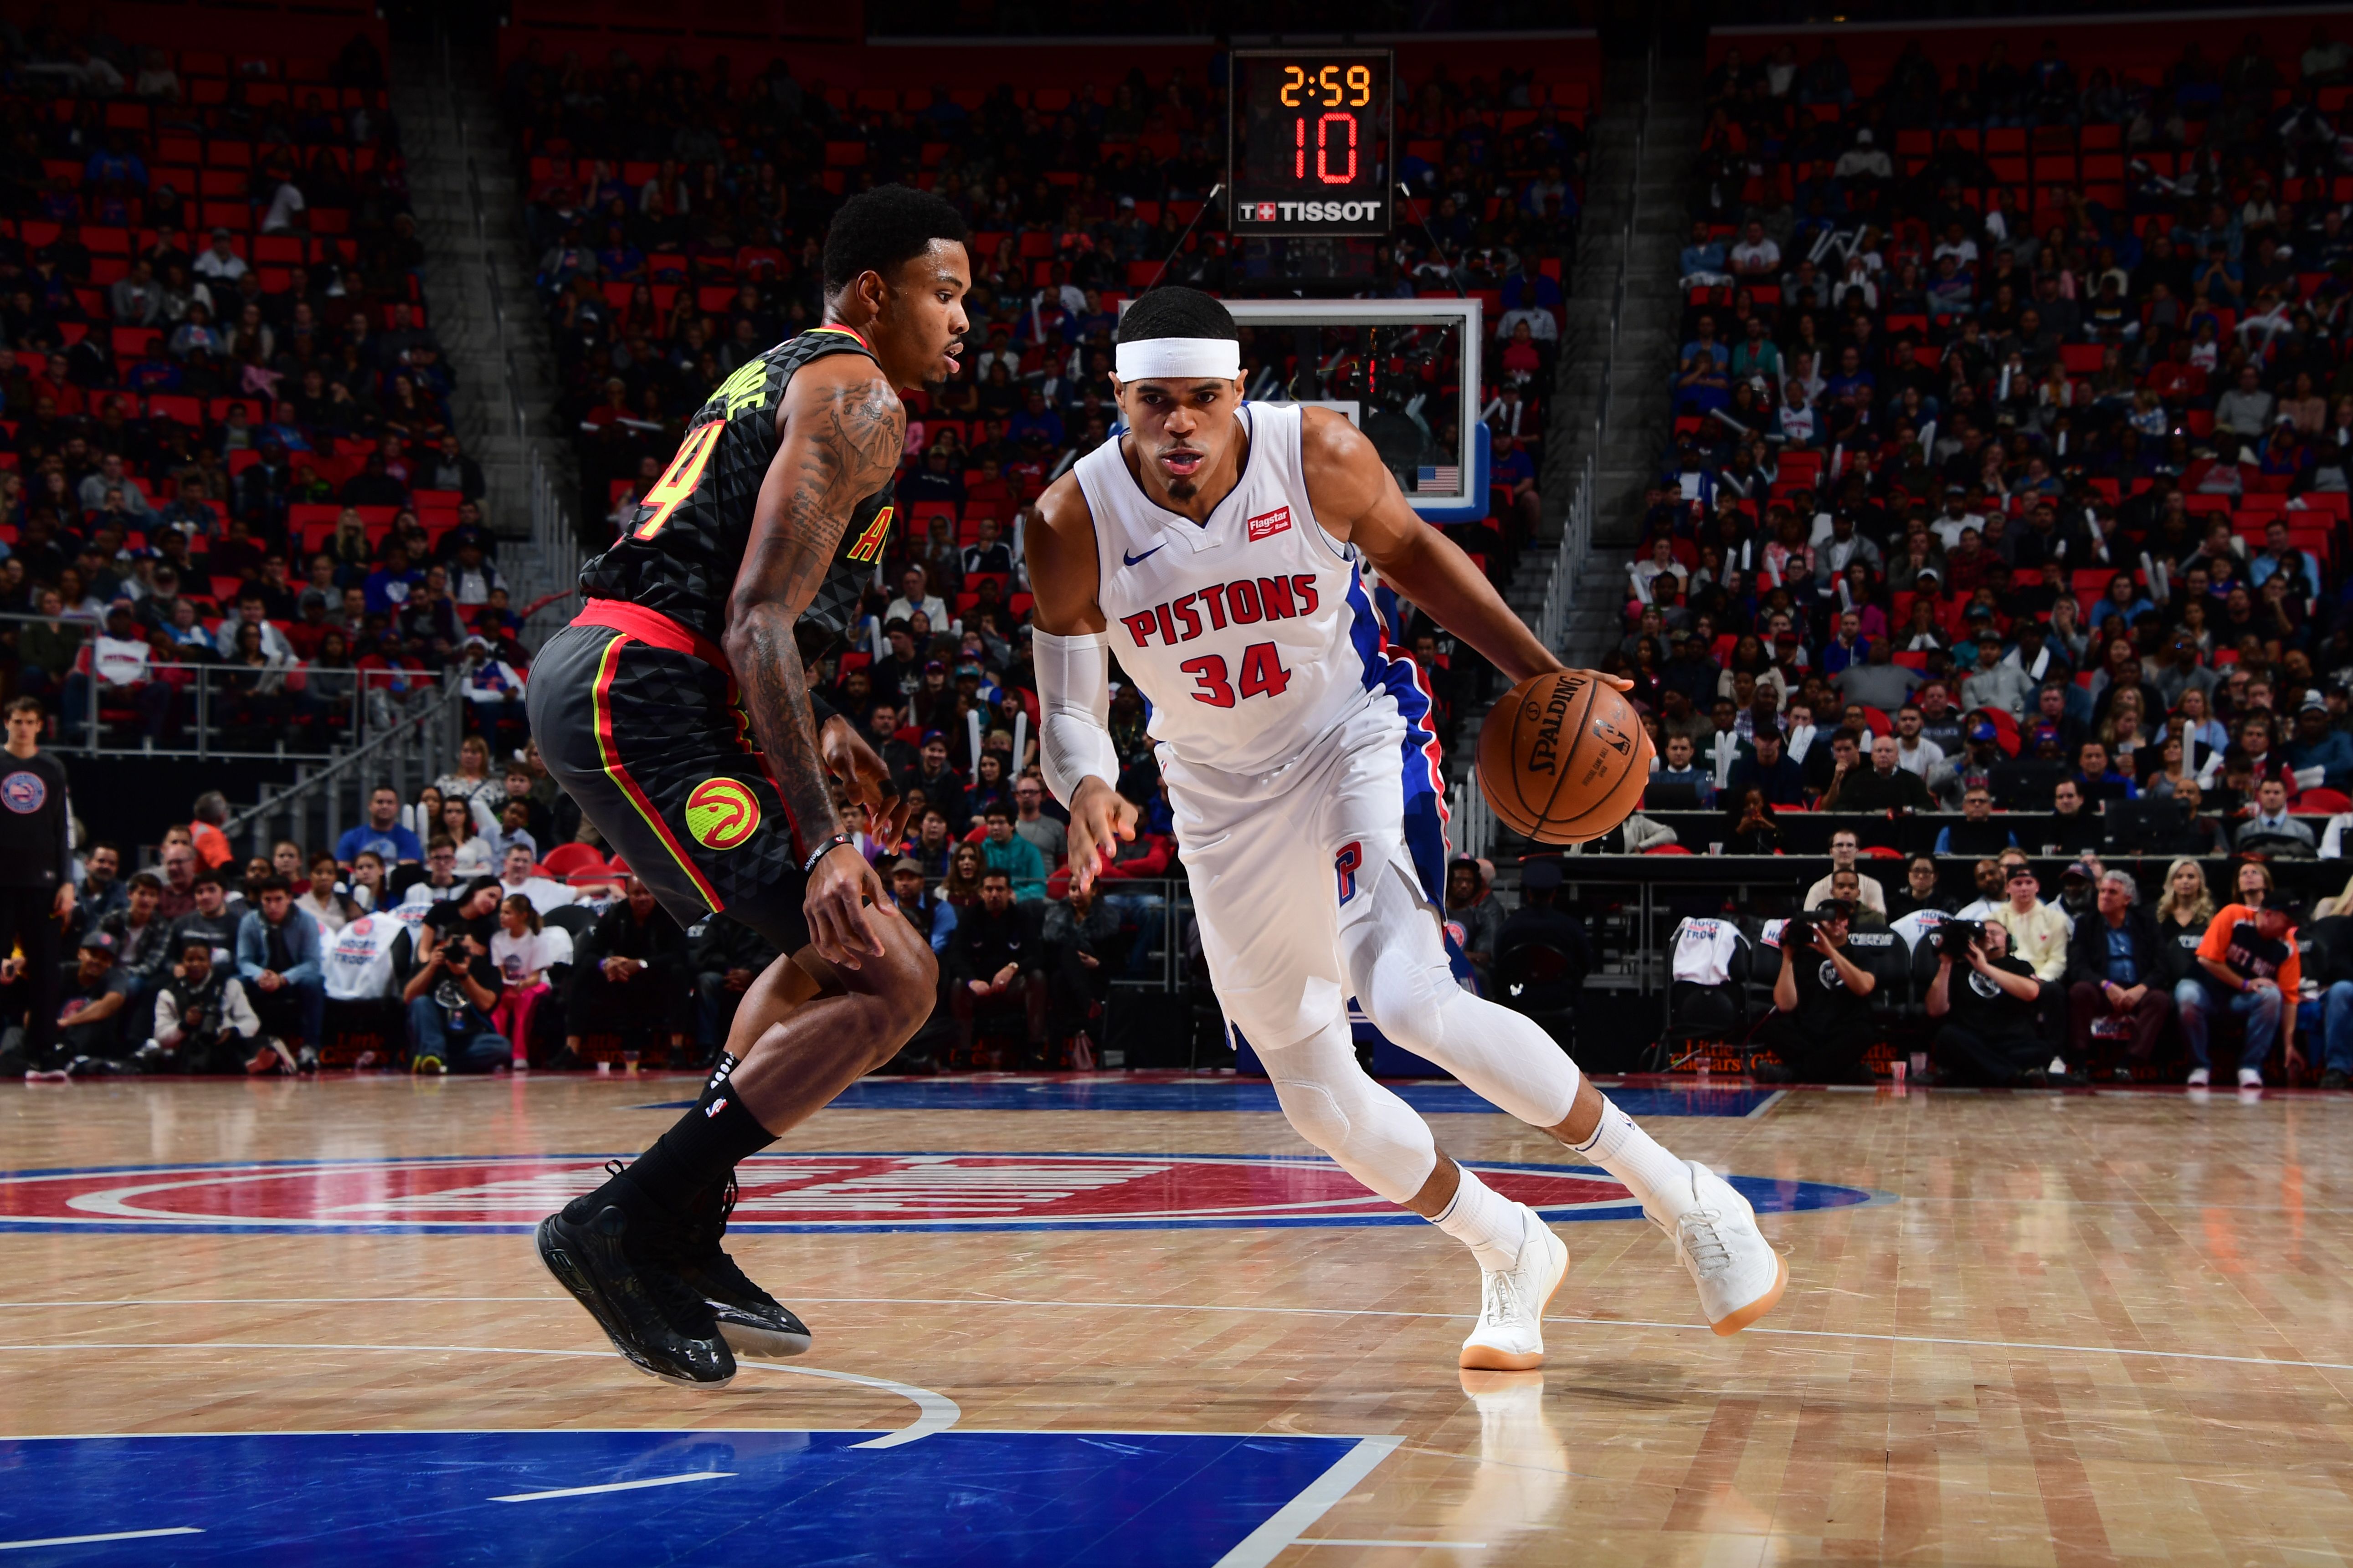 Tobias Harris credits eye surgery for improved jumper